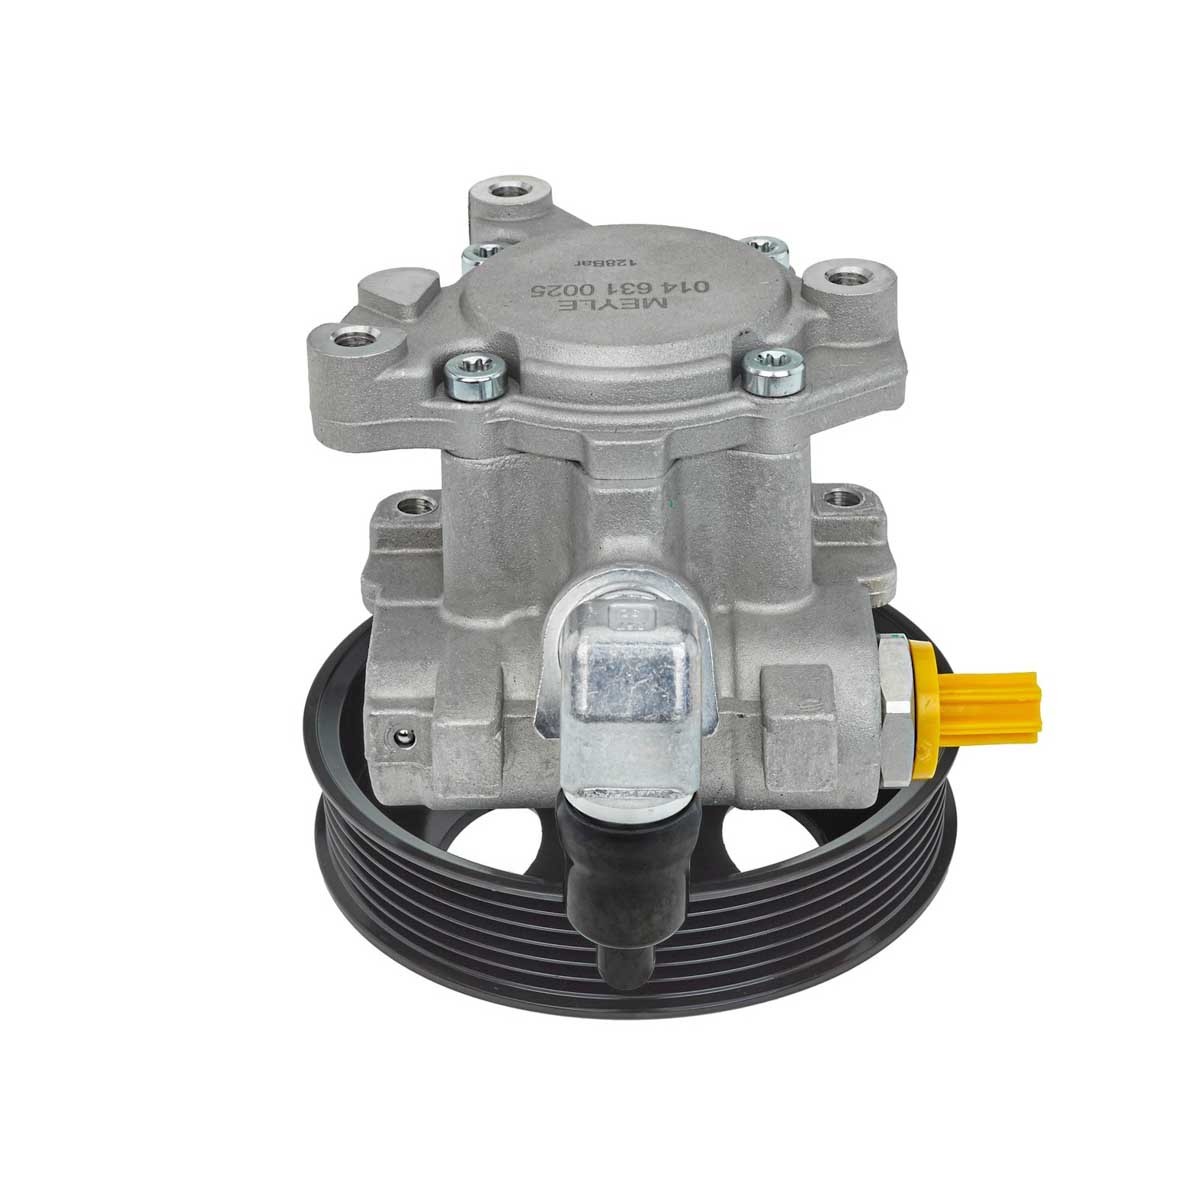 MEYLE Hydraulic steering pump 014 631 0025 suitable for MERCEDES-BENZ E-Class, SLK, CLS